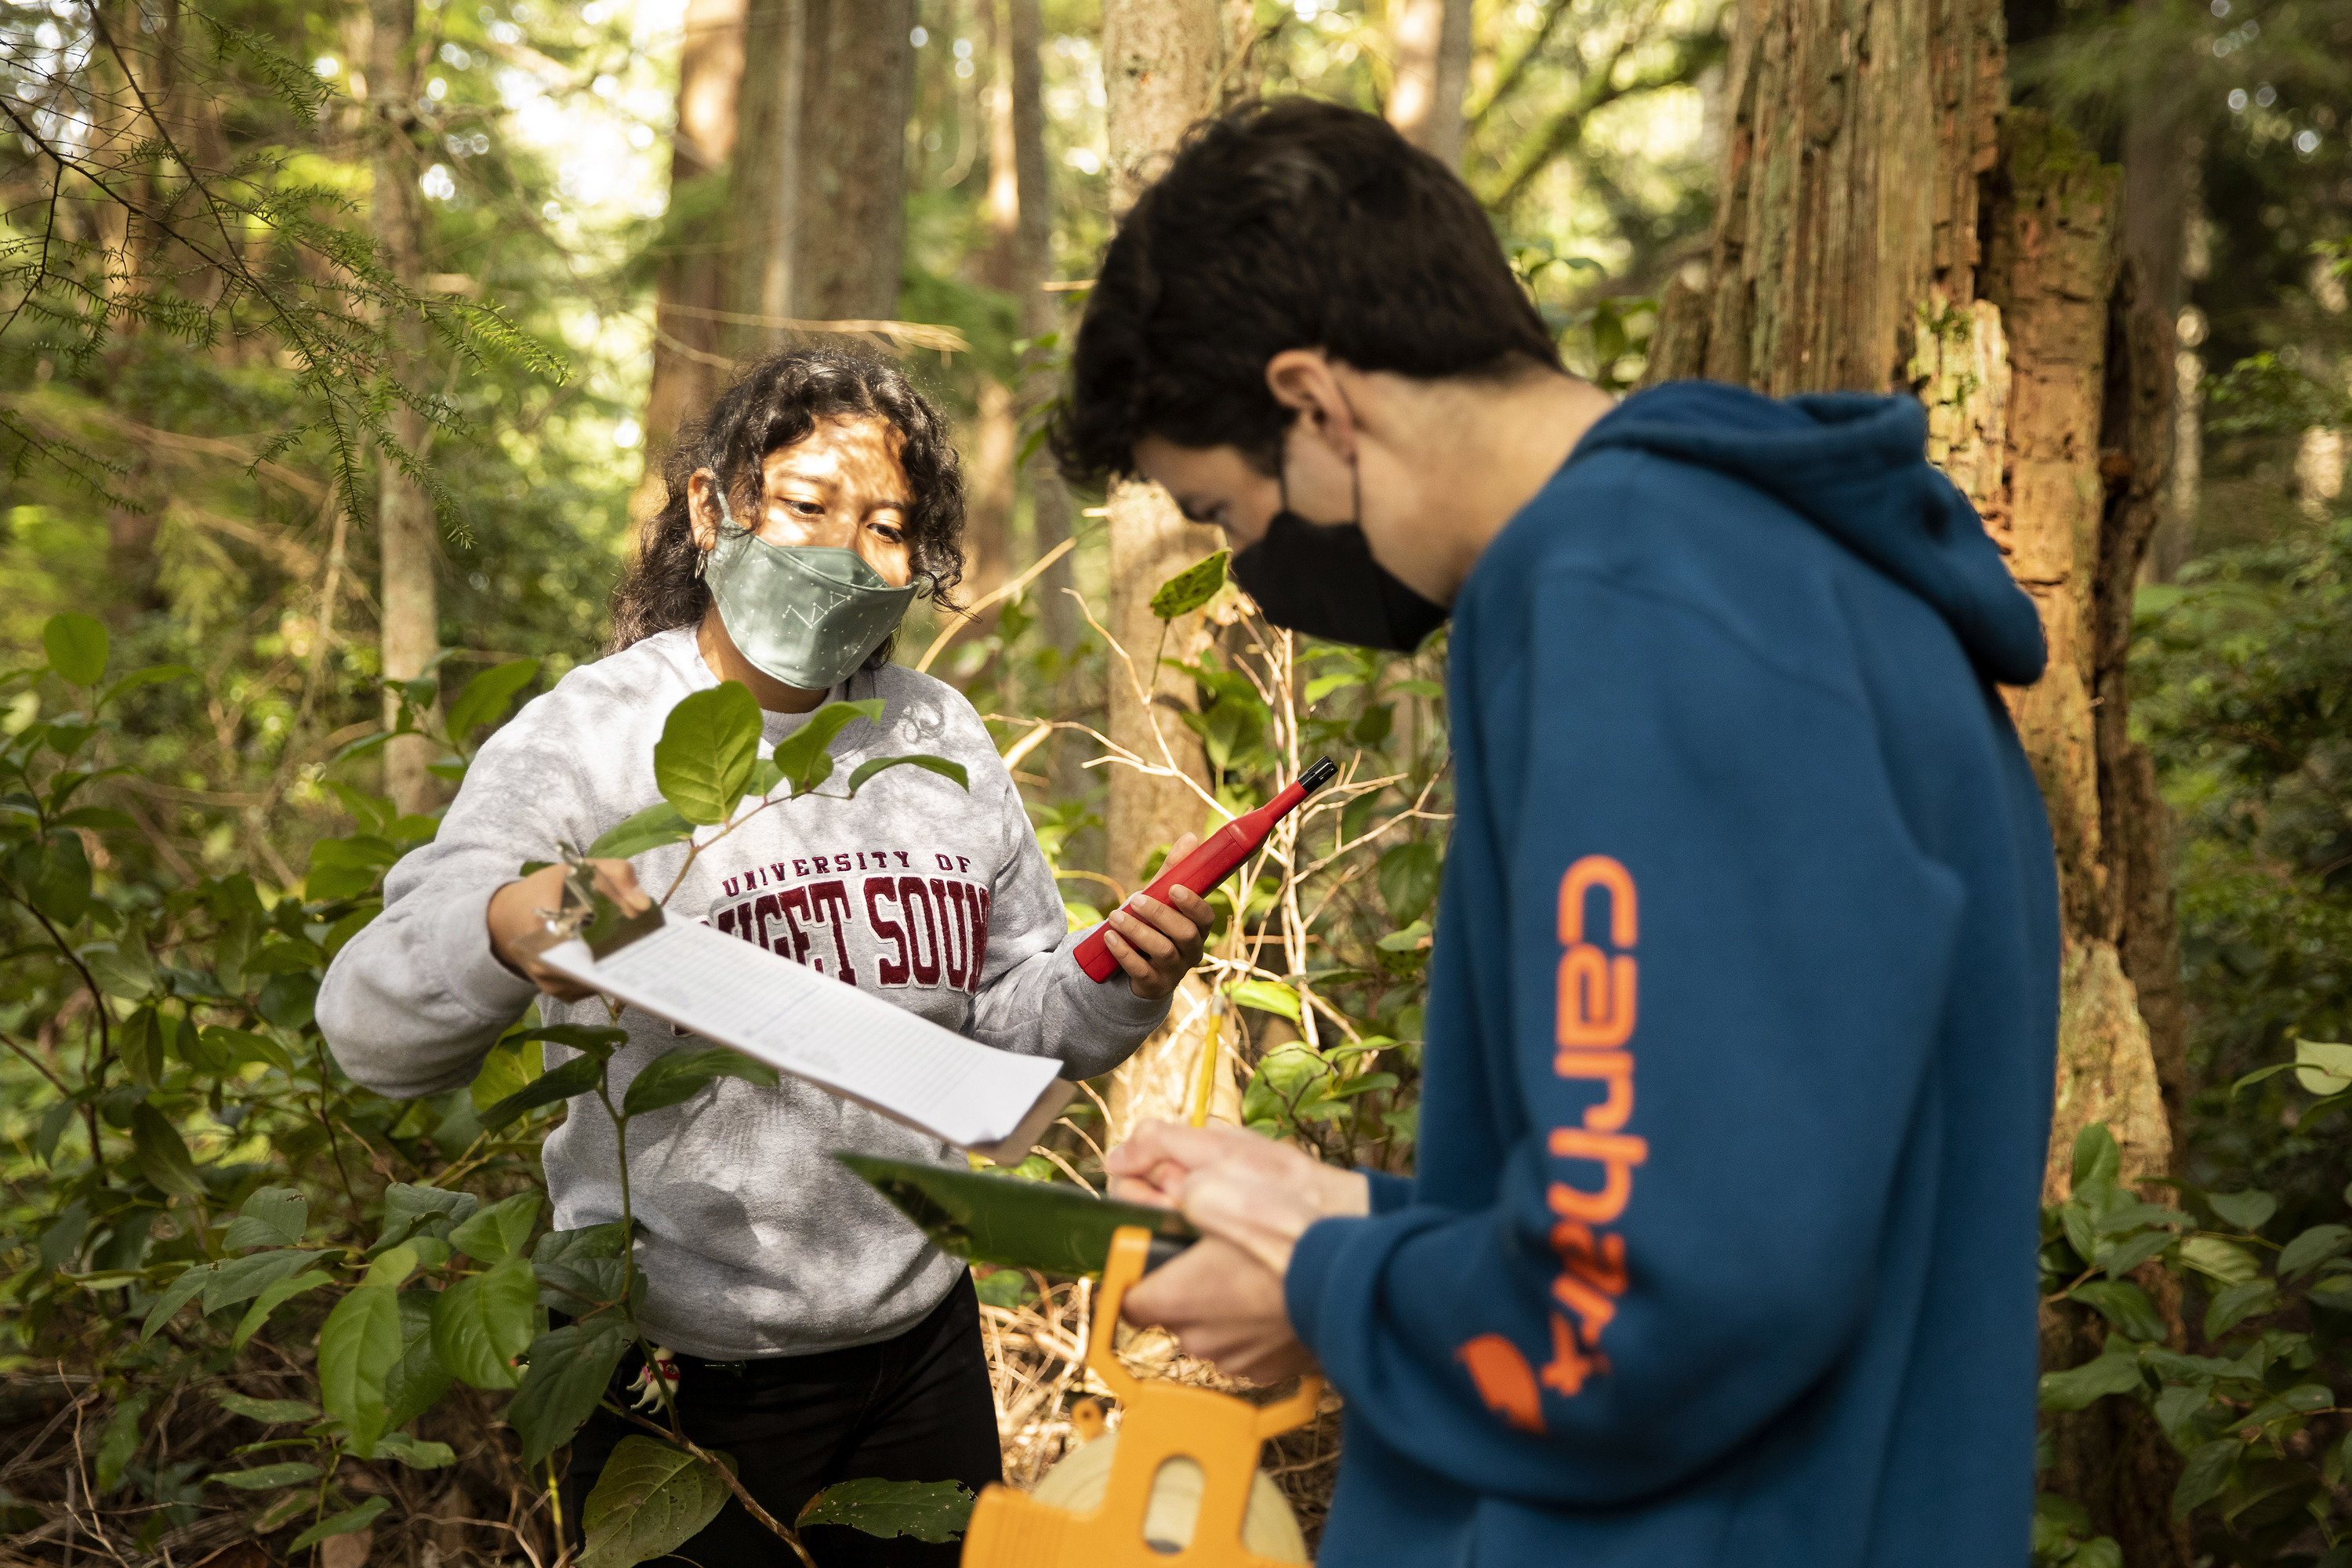 Students doing research in the forest.